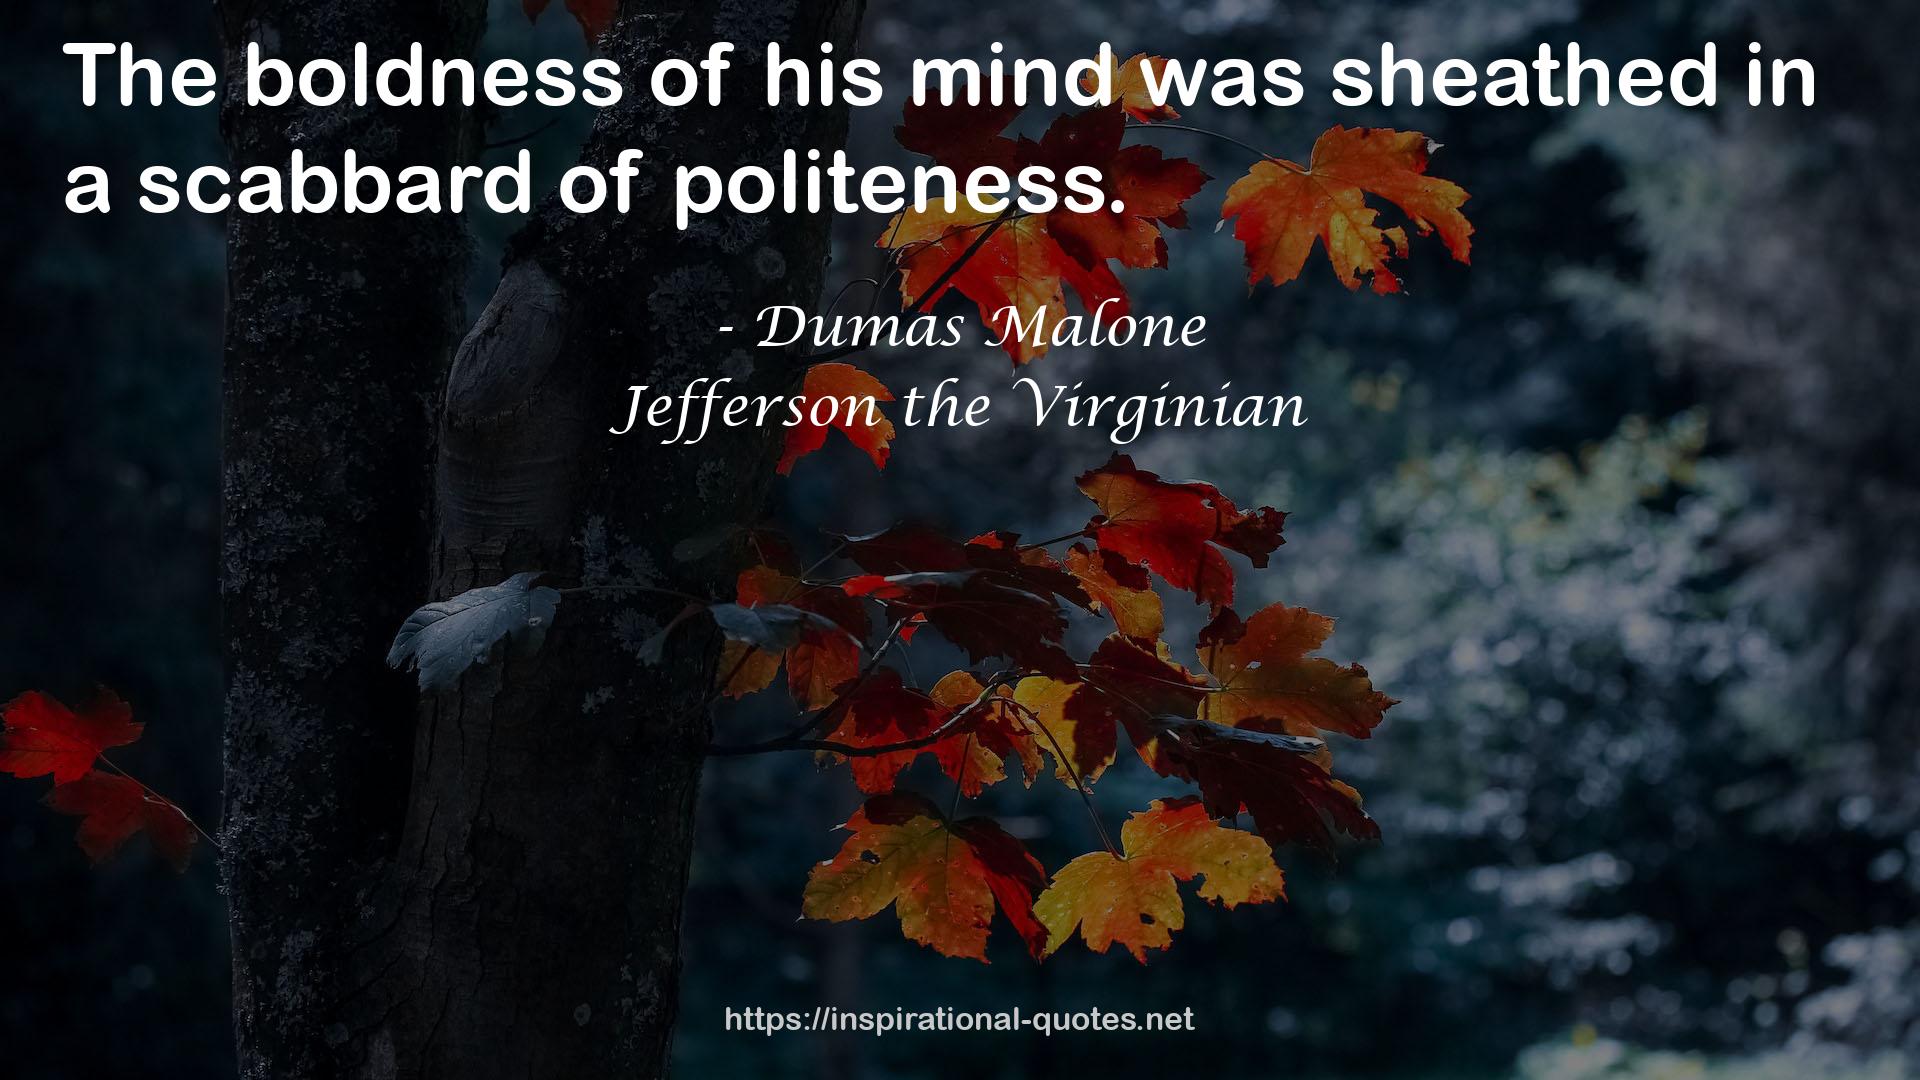 Jefferson the Virginian QUOTES